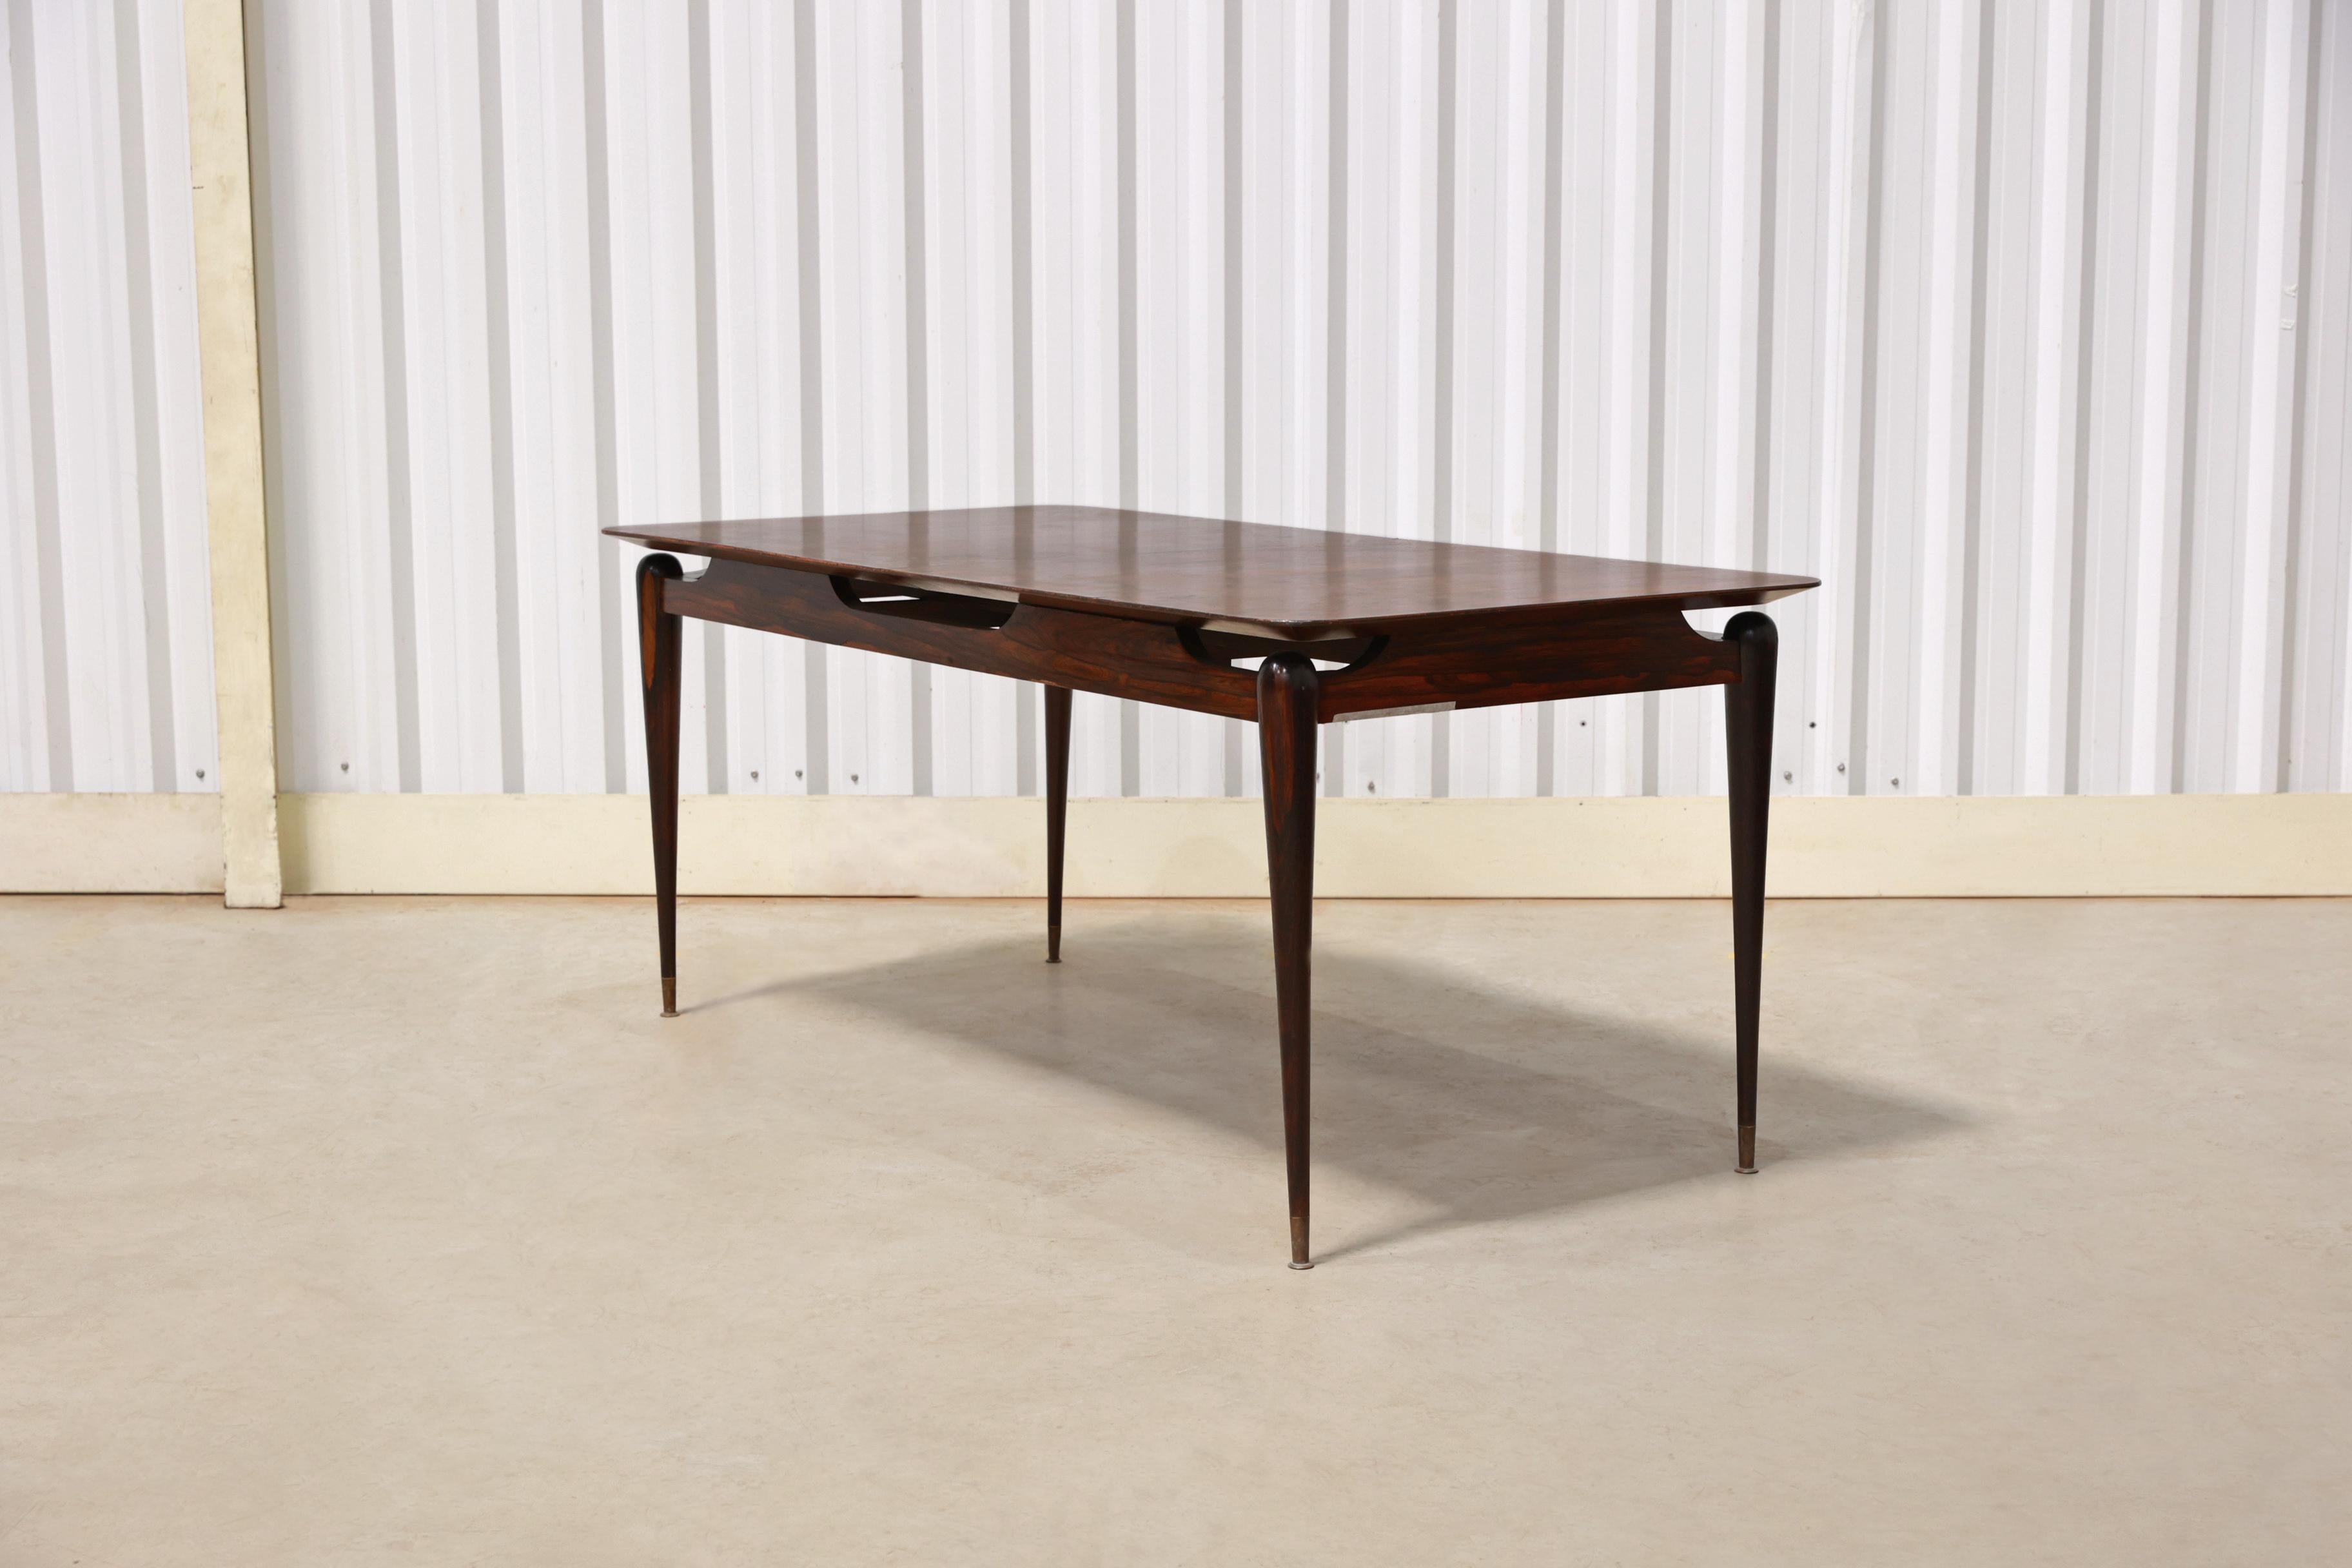 Hand-Carved Mid-Century Modern Dining Table in Hardwood by Giuseppe Scapinelli, Brazil For Sale